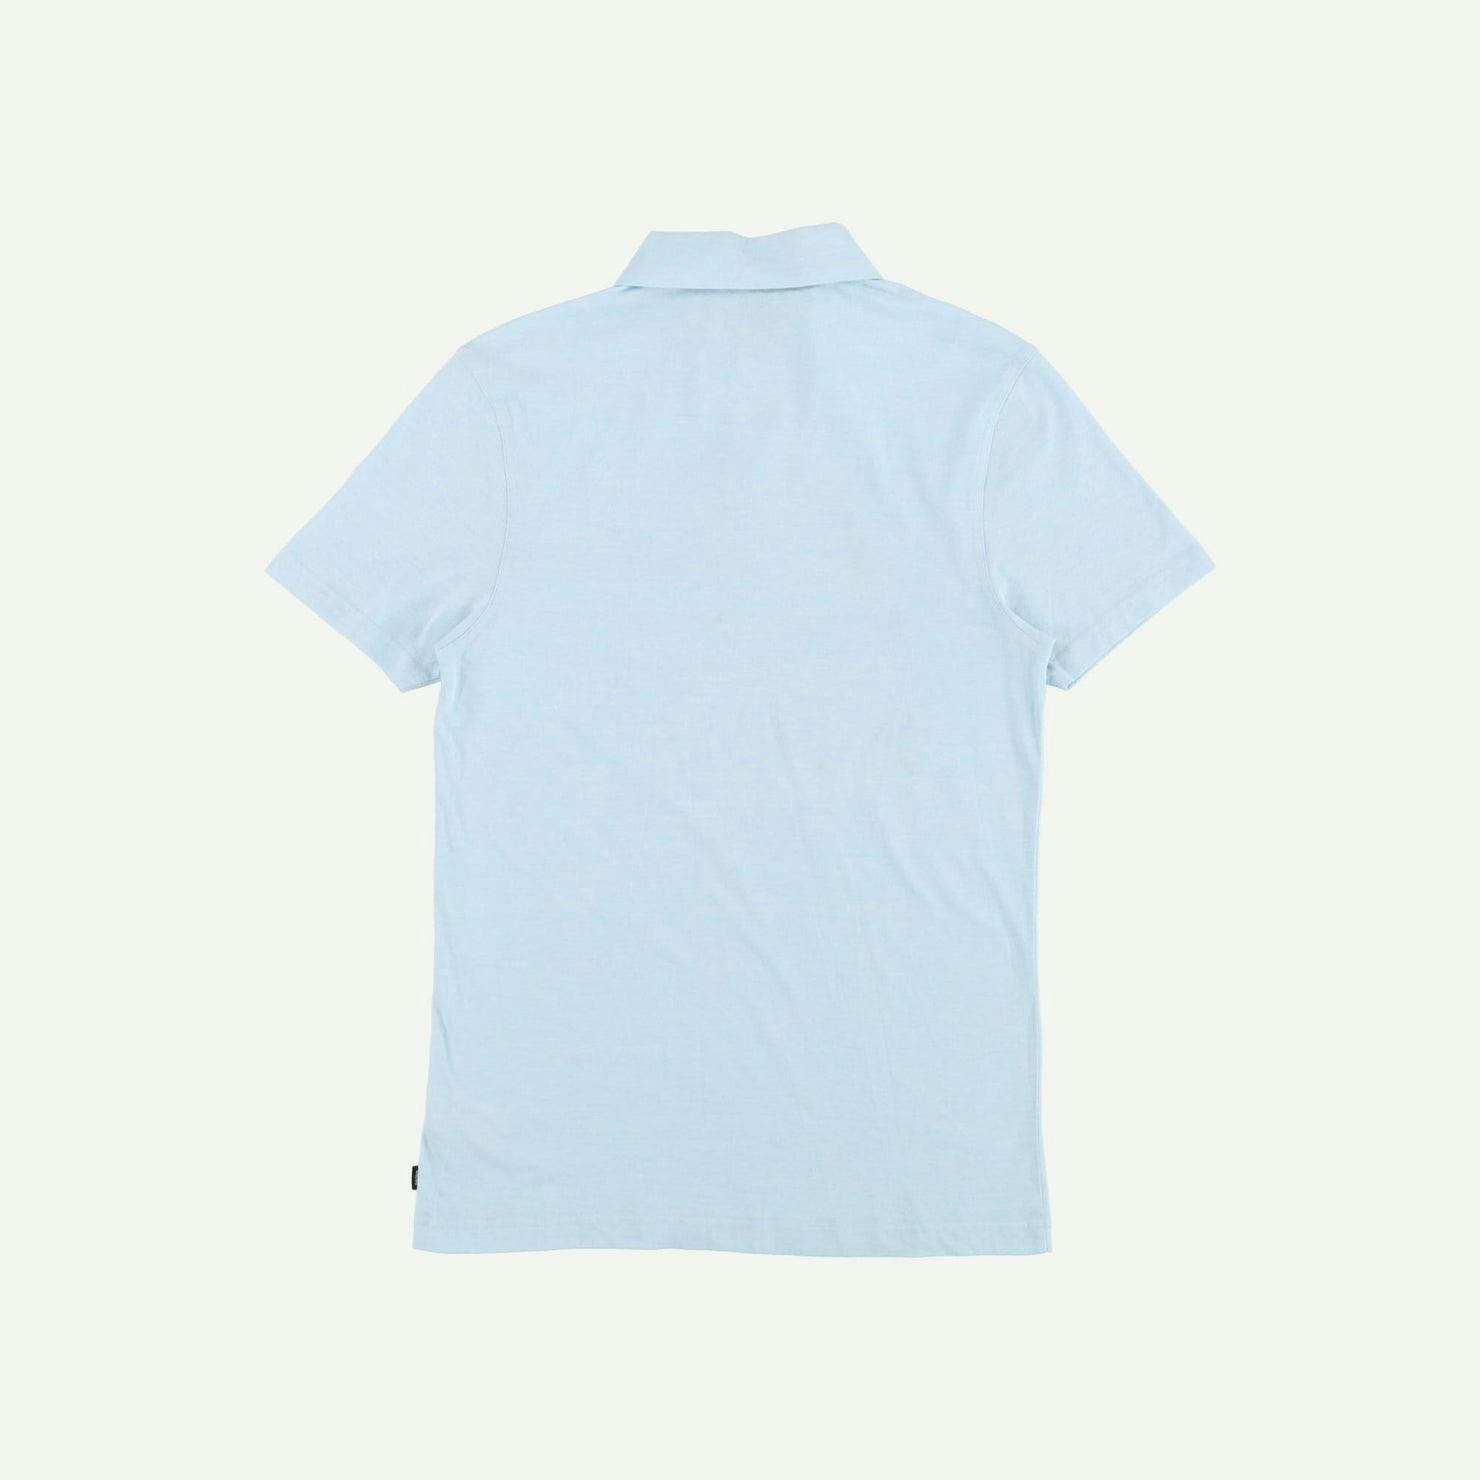 Finisterre As new Blue Polo Shirt